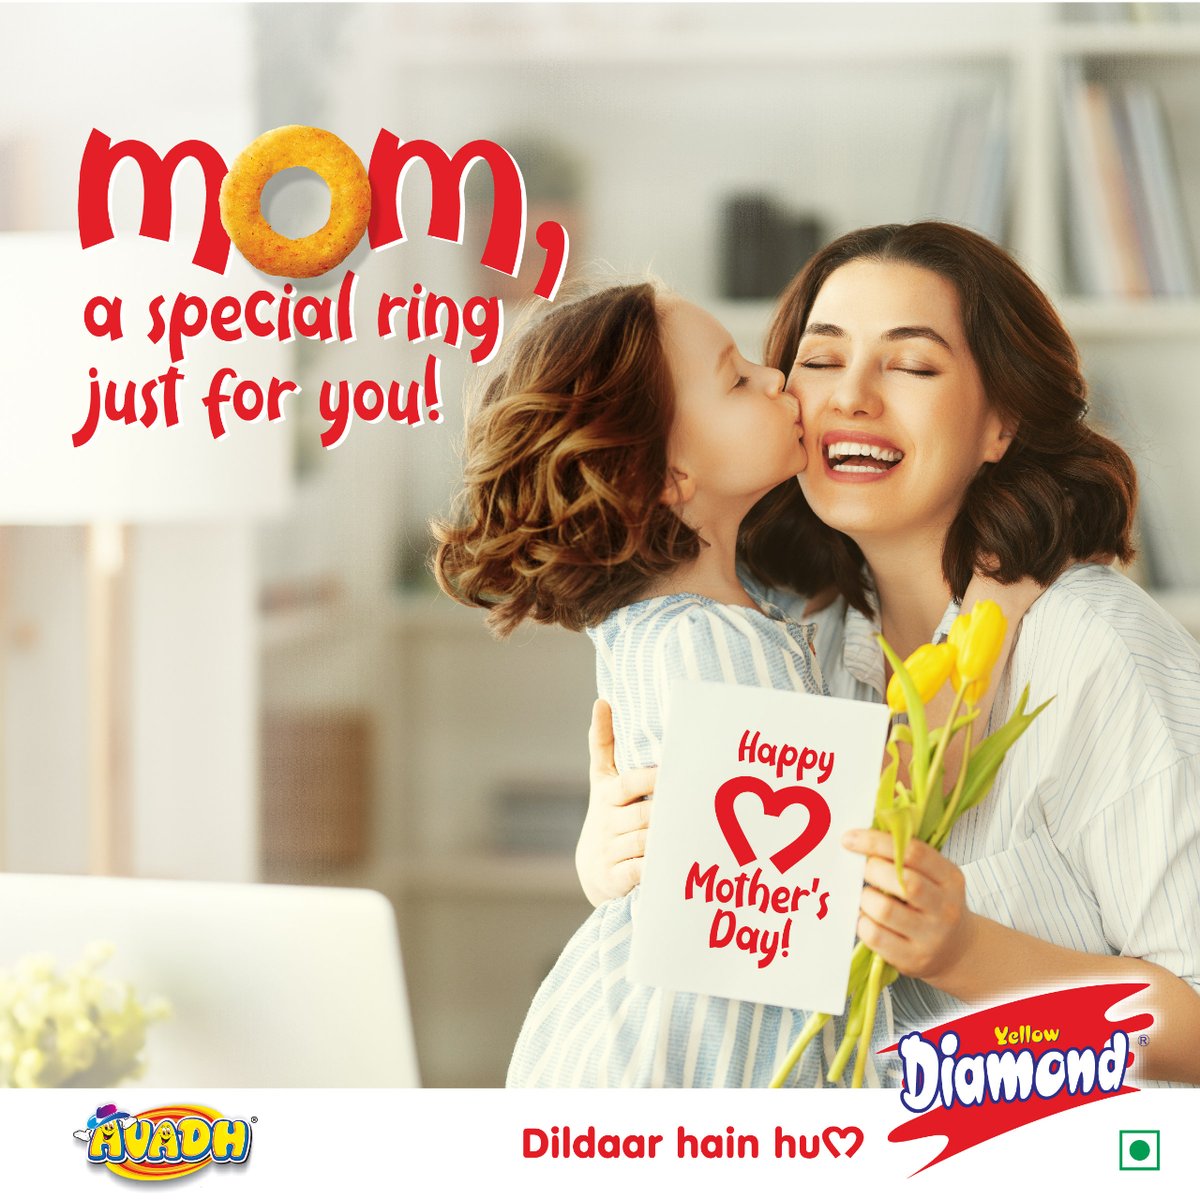 Moms don’t need diamonds when they have the hearts of their loving children. We're celebrating all the love, joy, and sacrifices you make every day. Happy Mother's Day to all the wonderful mothers from Yellow Diamond!

#YellowDiamond #DilDaarHaiHum #RichFeast #Avadh #MothersDay